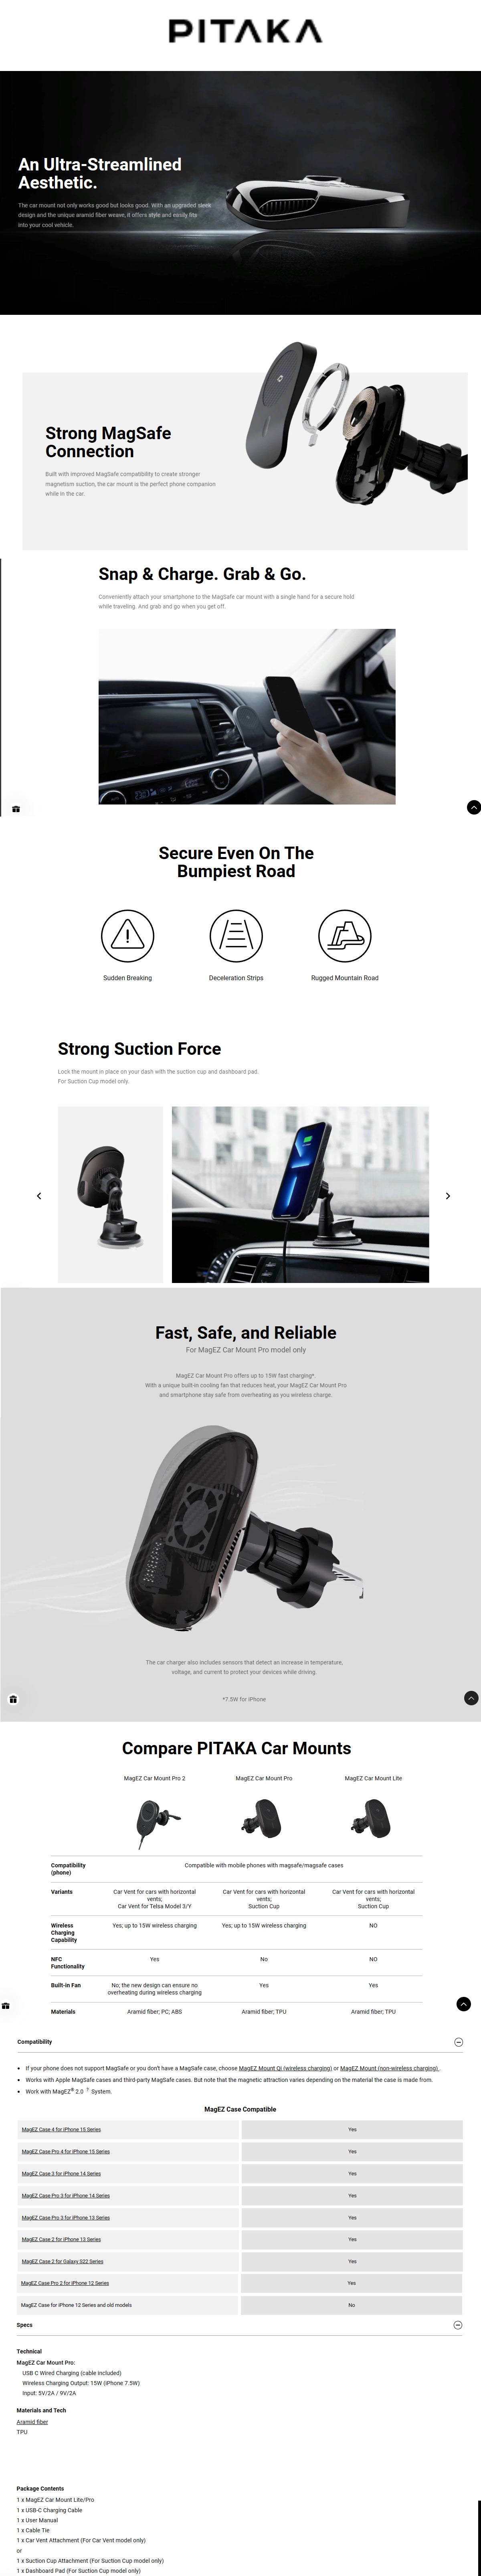 PITAKA MagEZ Car Mount Pro with Wireless MagSafe Charging - Suction Cup